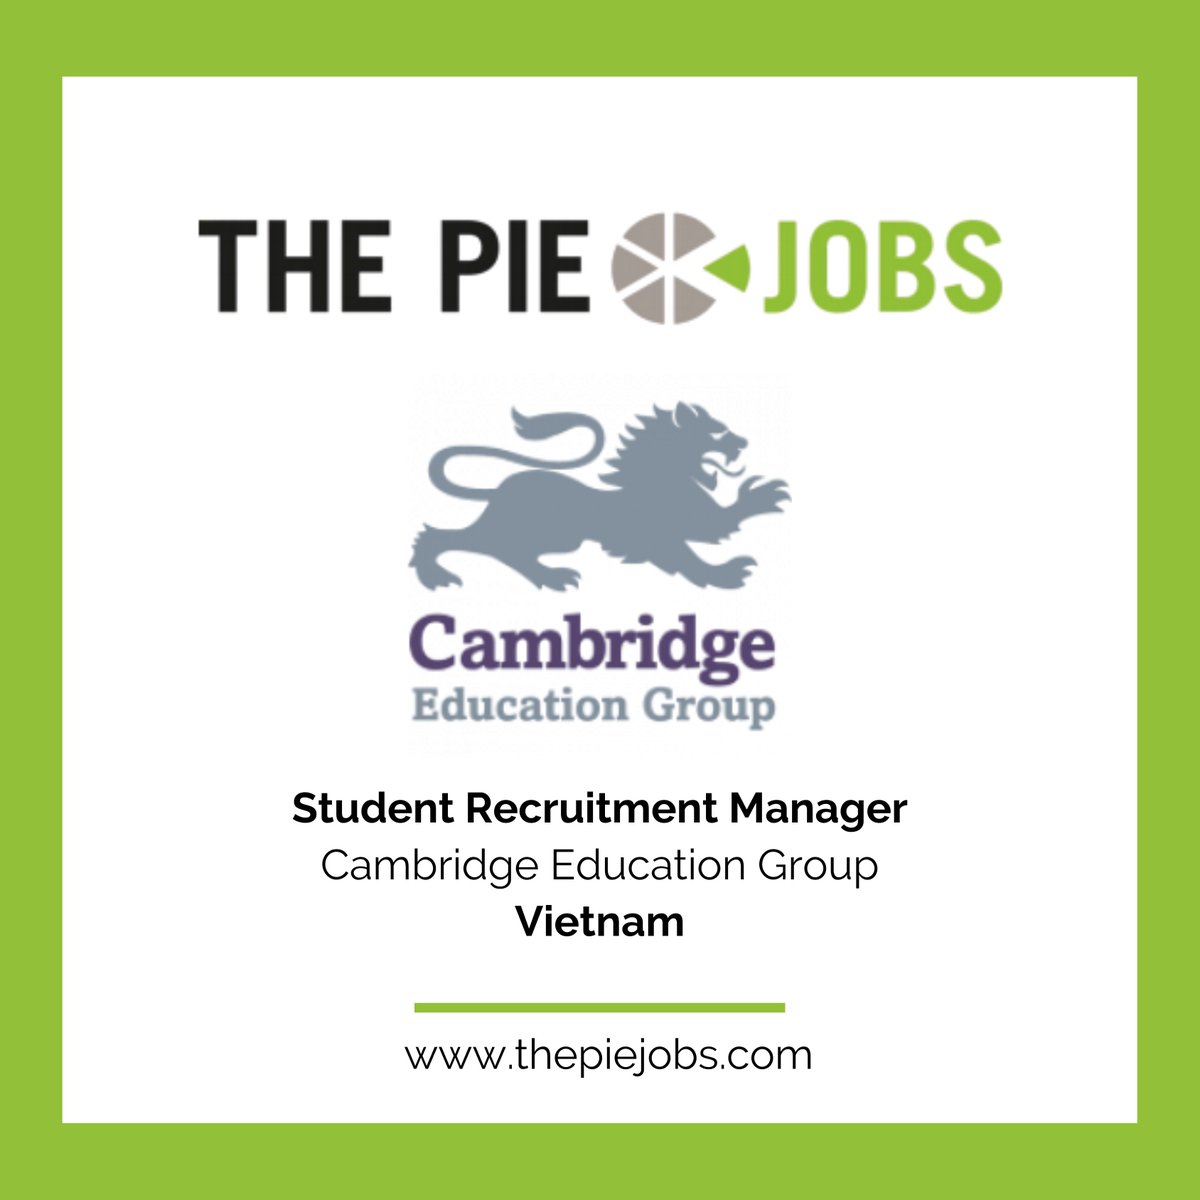 Cambridge Education Group is seeking a Student Recruitment #Manager based in #Vietnam to join their new team!

Interested? Apply by 22nd May:
hubs.li/Q02x2Yh80

#hiring #intled #newjob #studentrecruitment #HigherEd #globaleducation